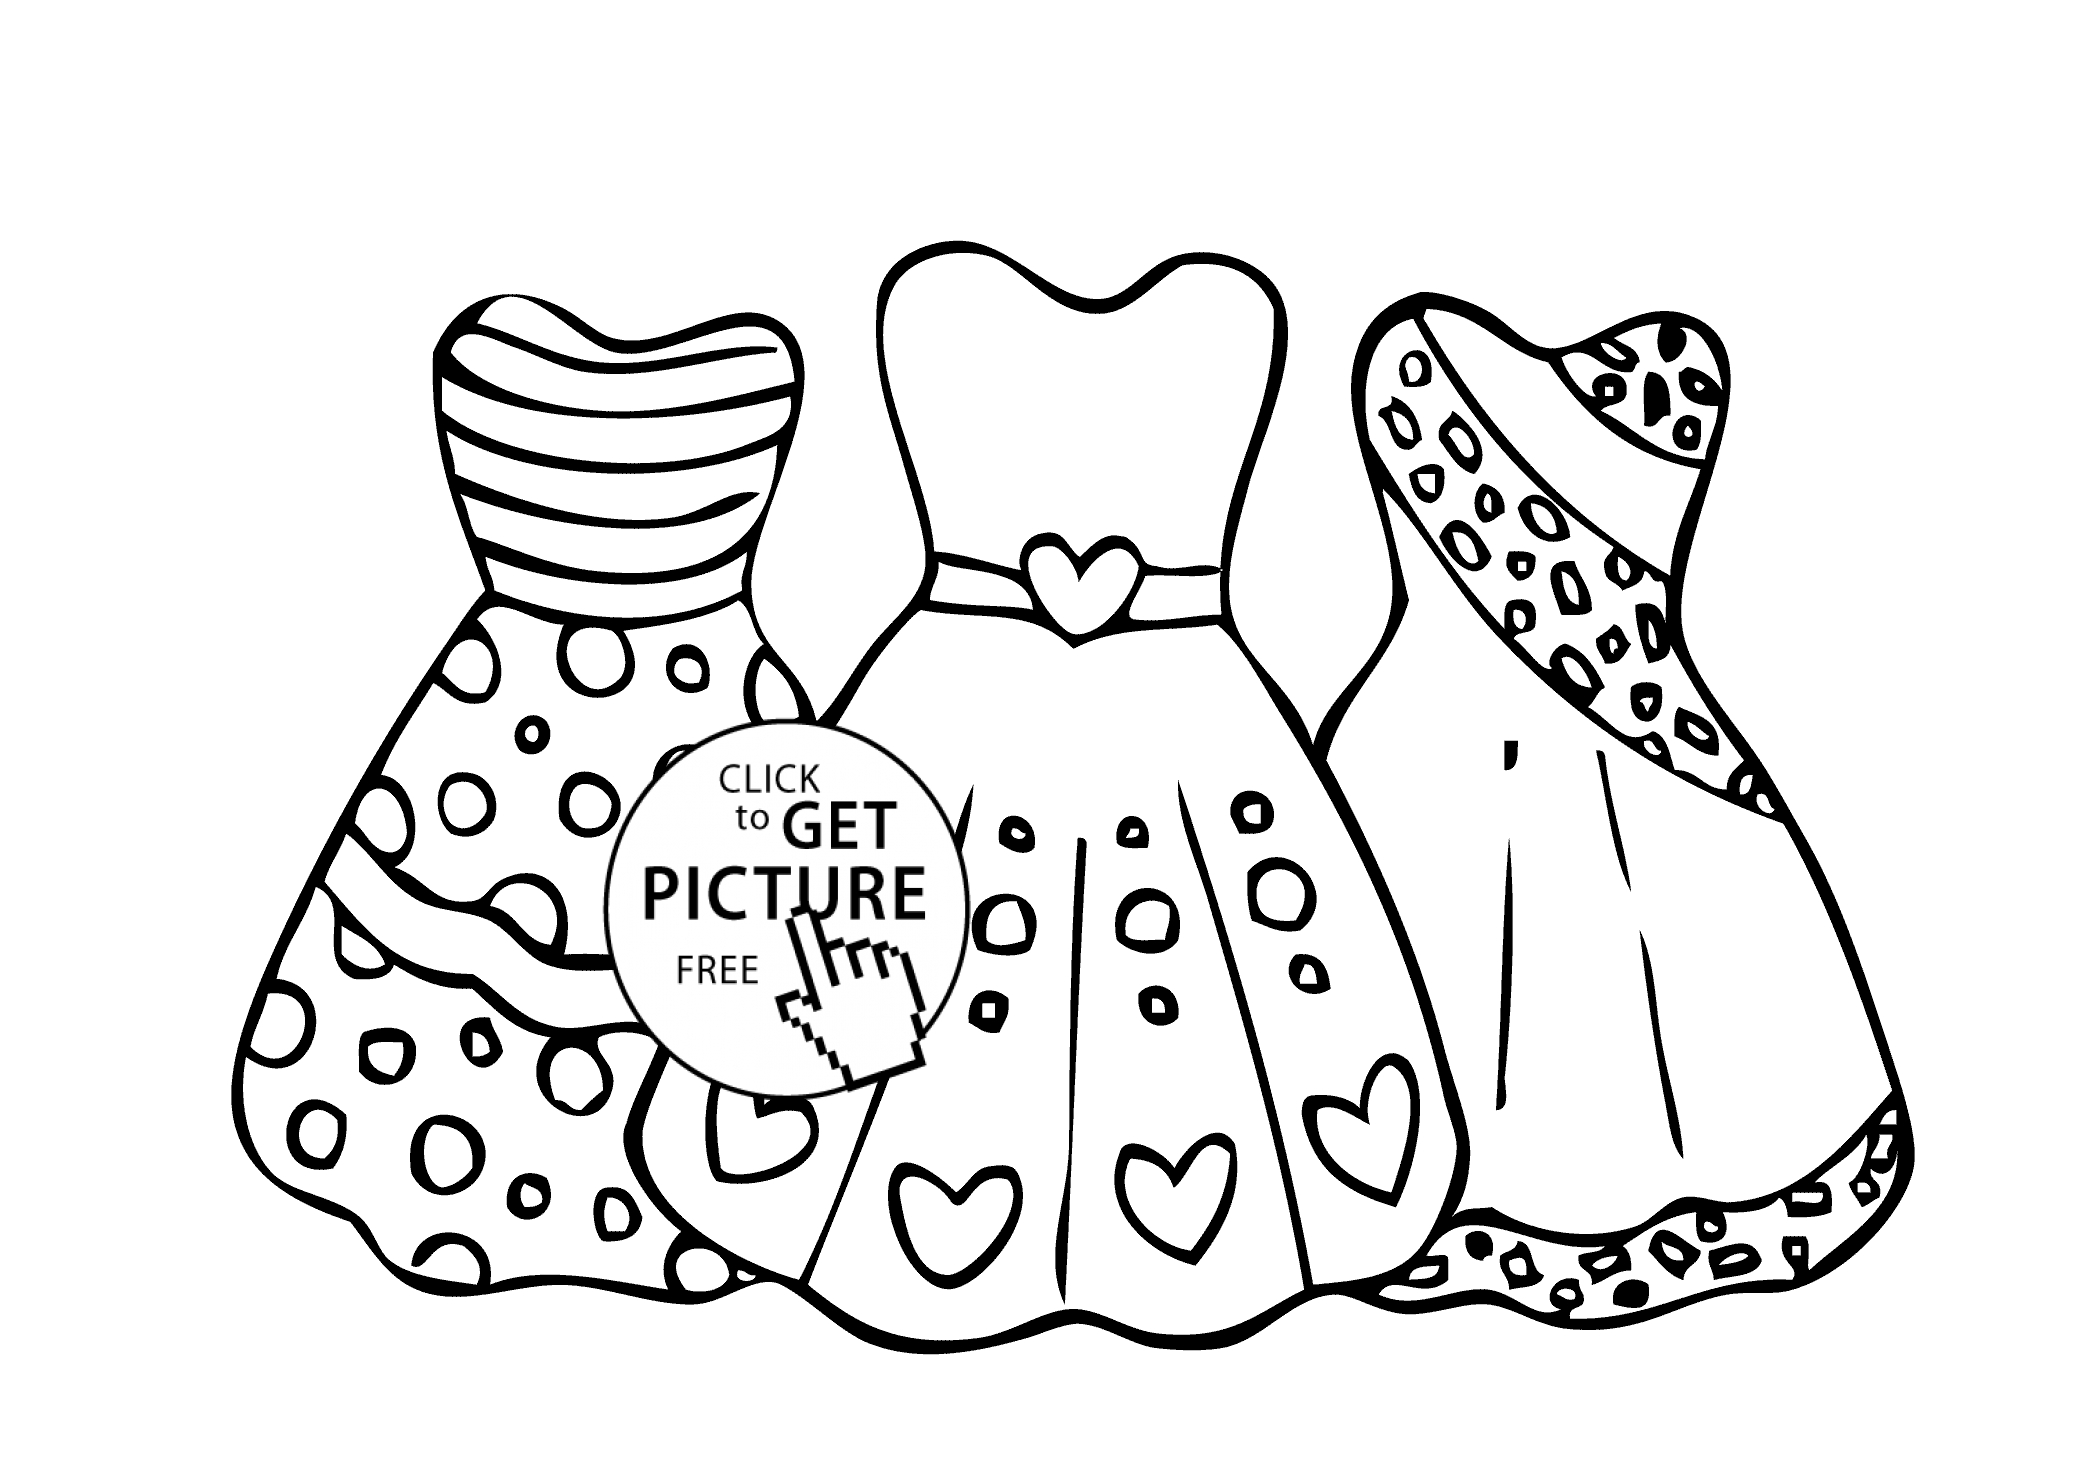 Coloring Pages For Elementary Students Cool Dresses For Girls Coloring Page Printable Free Coloing 4kids